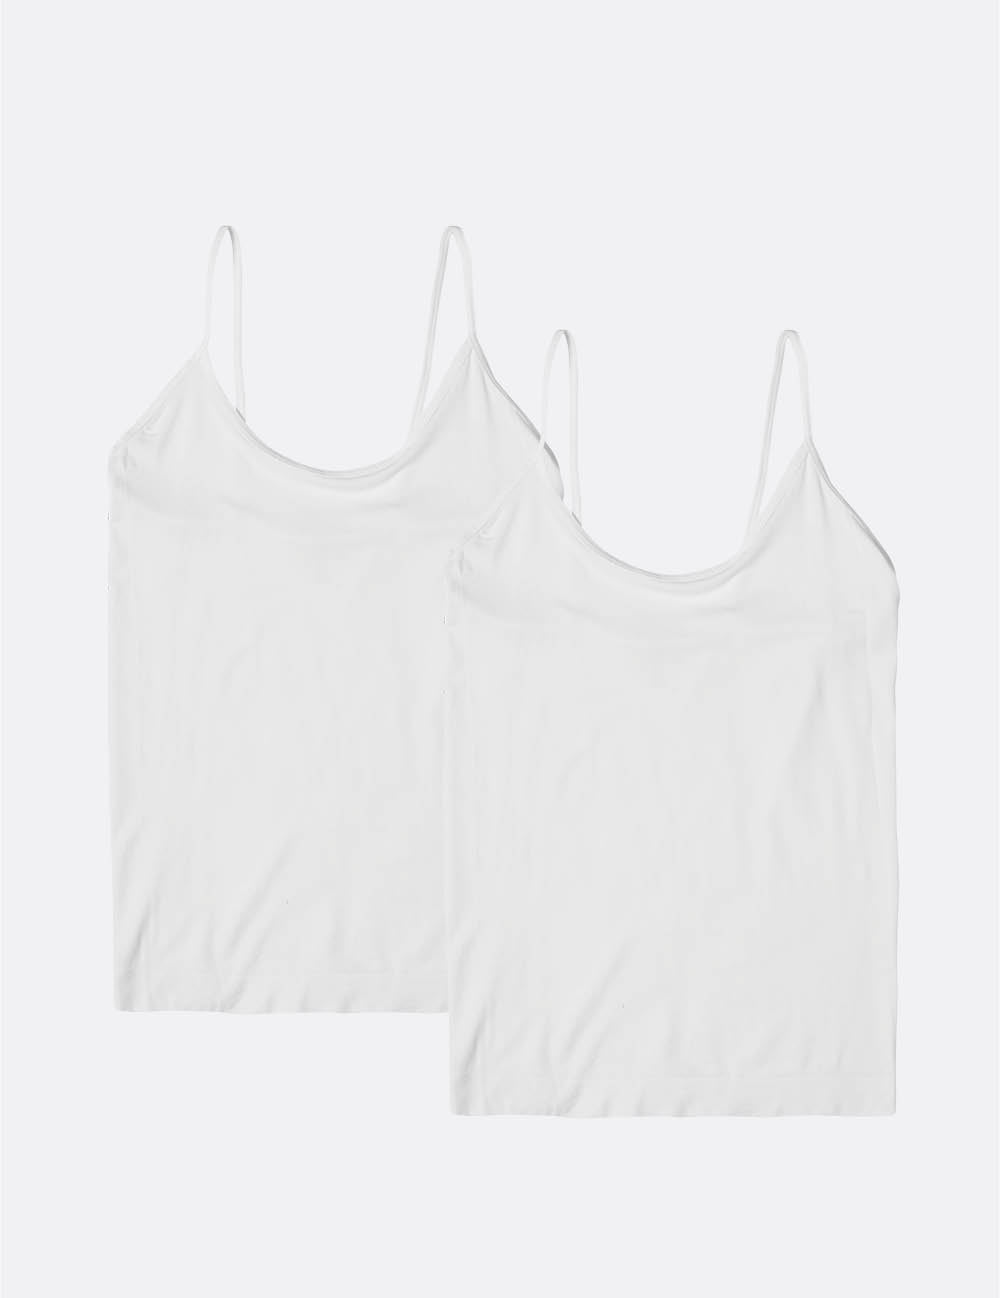 Boody Bamboo 2-pack of Cami Tank Tops in White